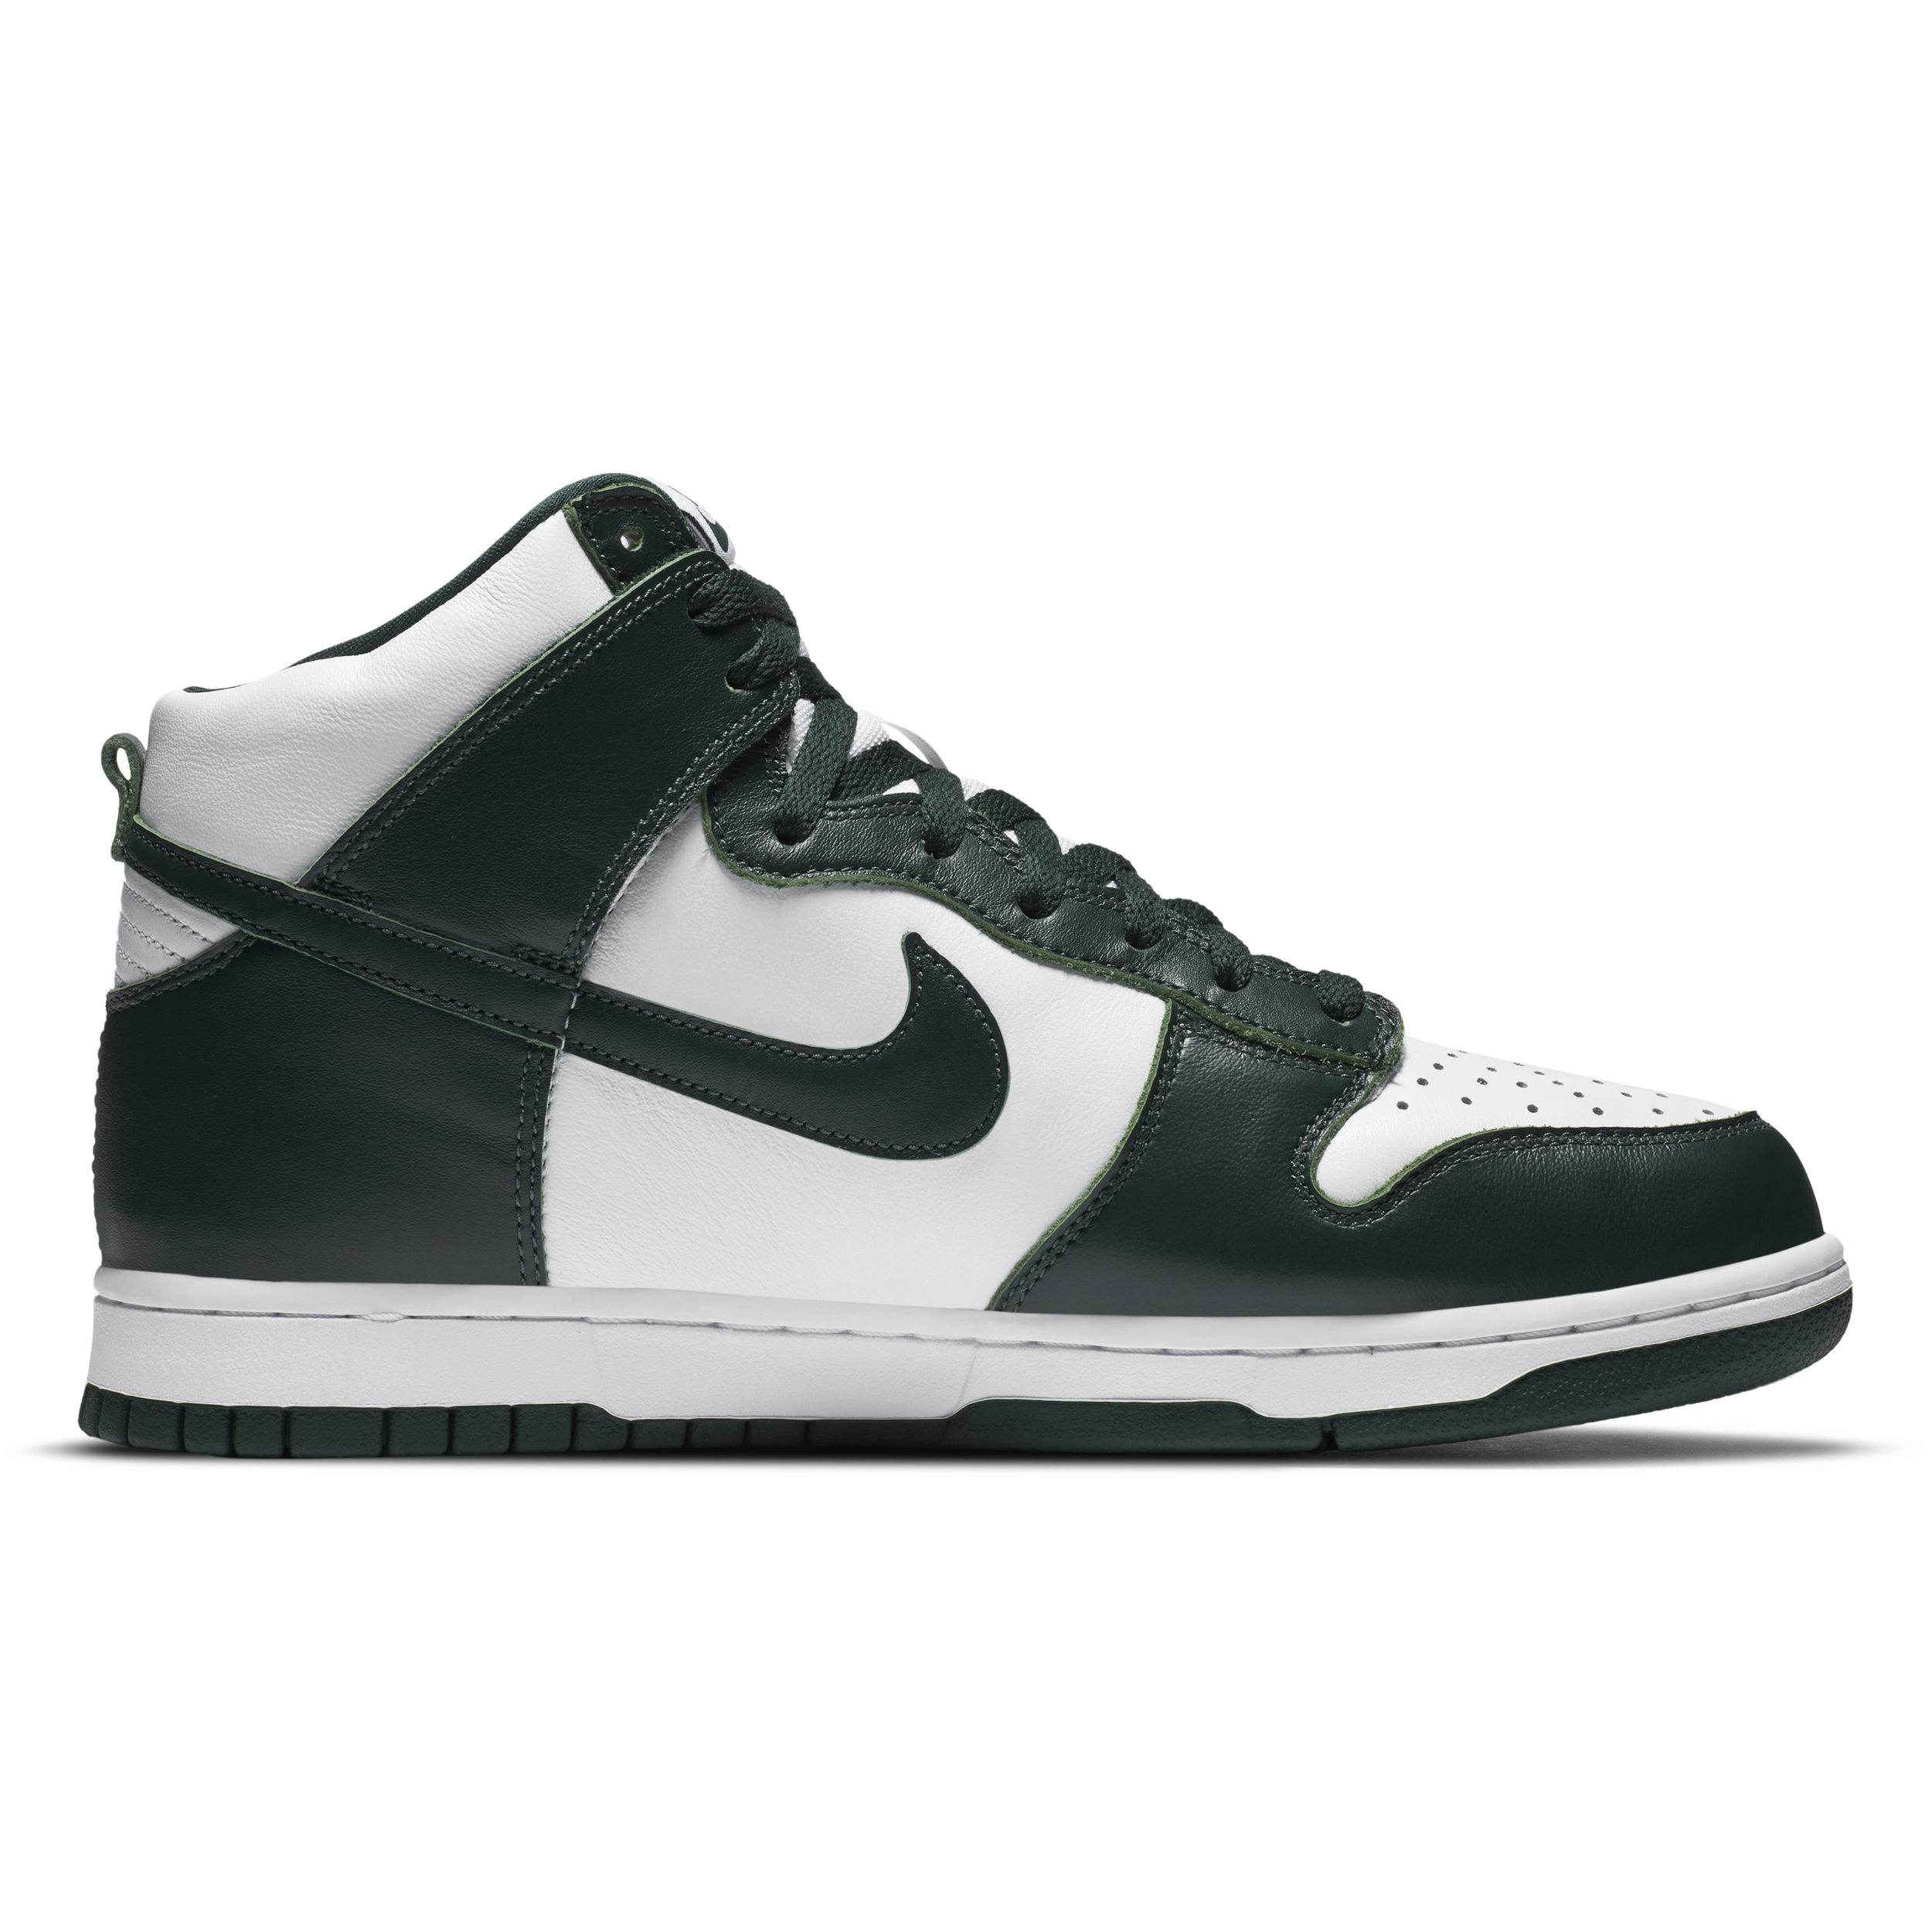 CNK-nike-dunk-high-pine-green-michigan-state-release-date-2020 (5).png